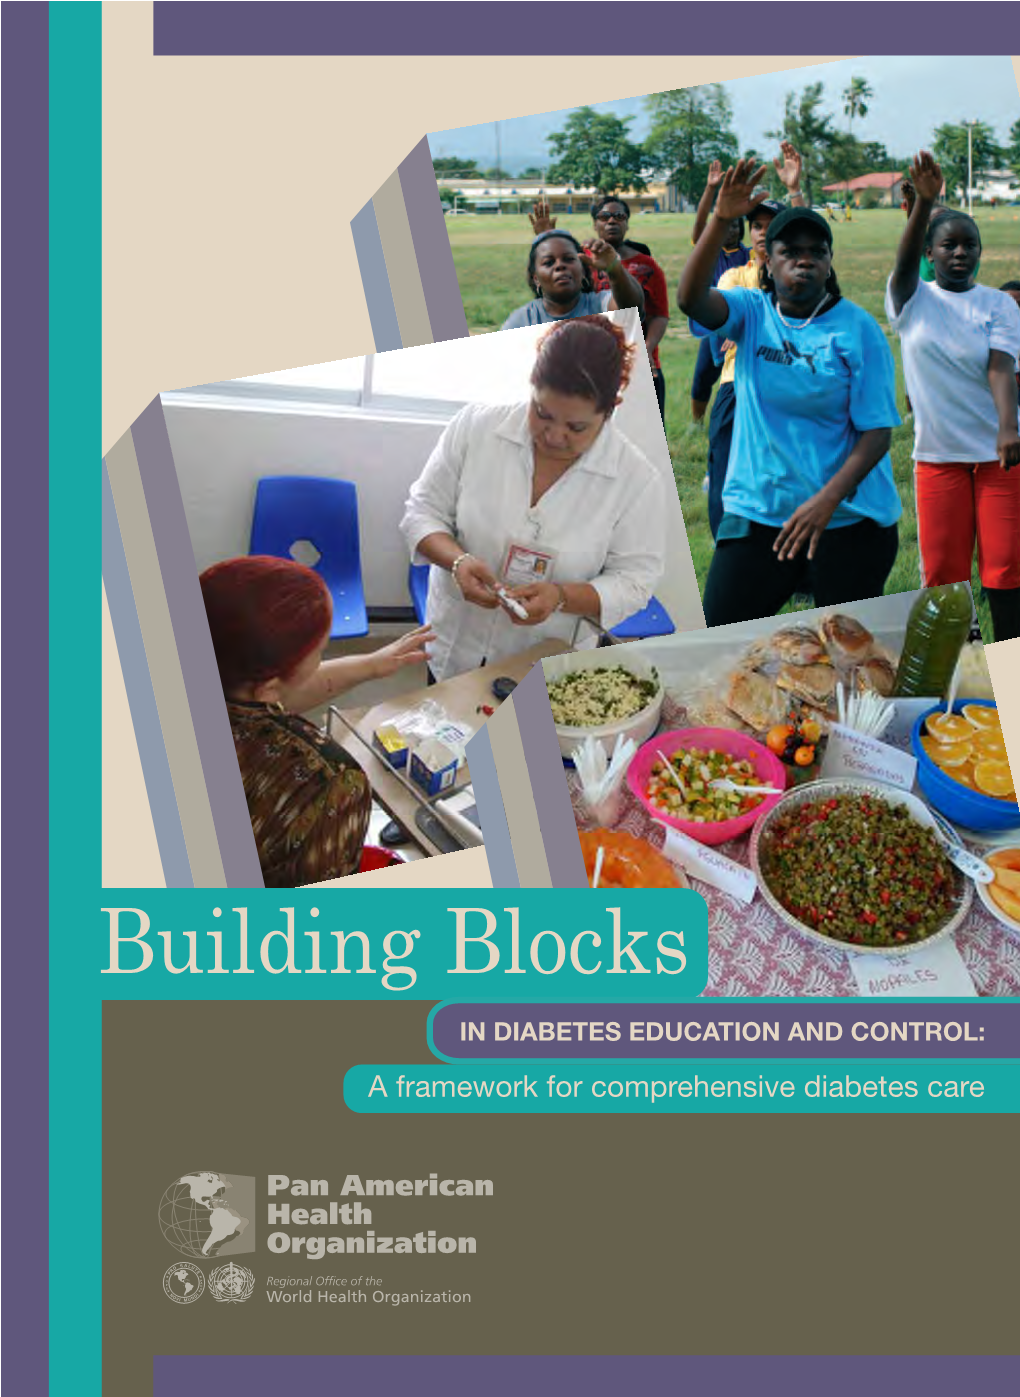 Building Blocks in Diabetes Education and Control